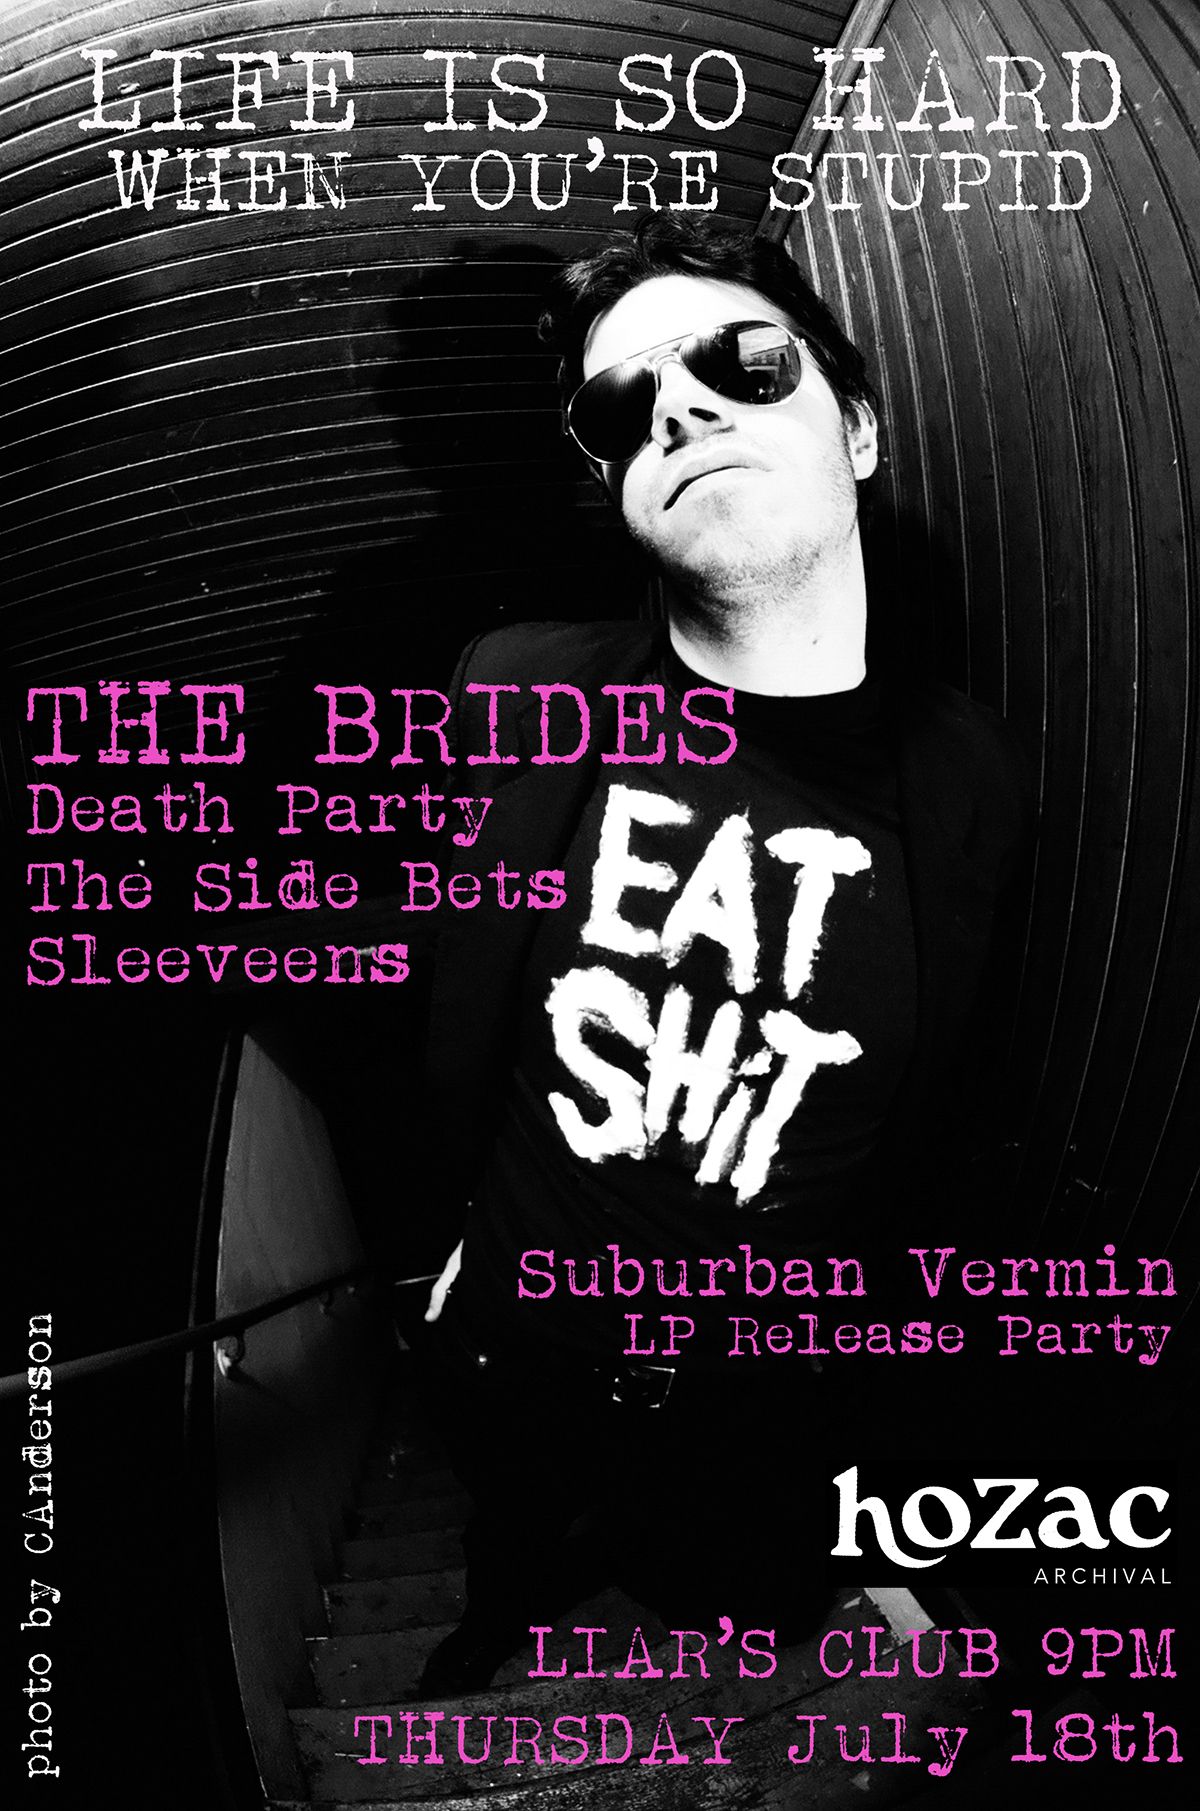 THE BRIDES LP Release Party with Death Party, The Side-Bets & SLEEVEENS